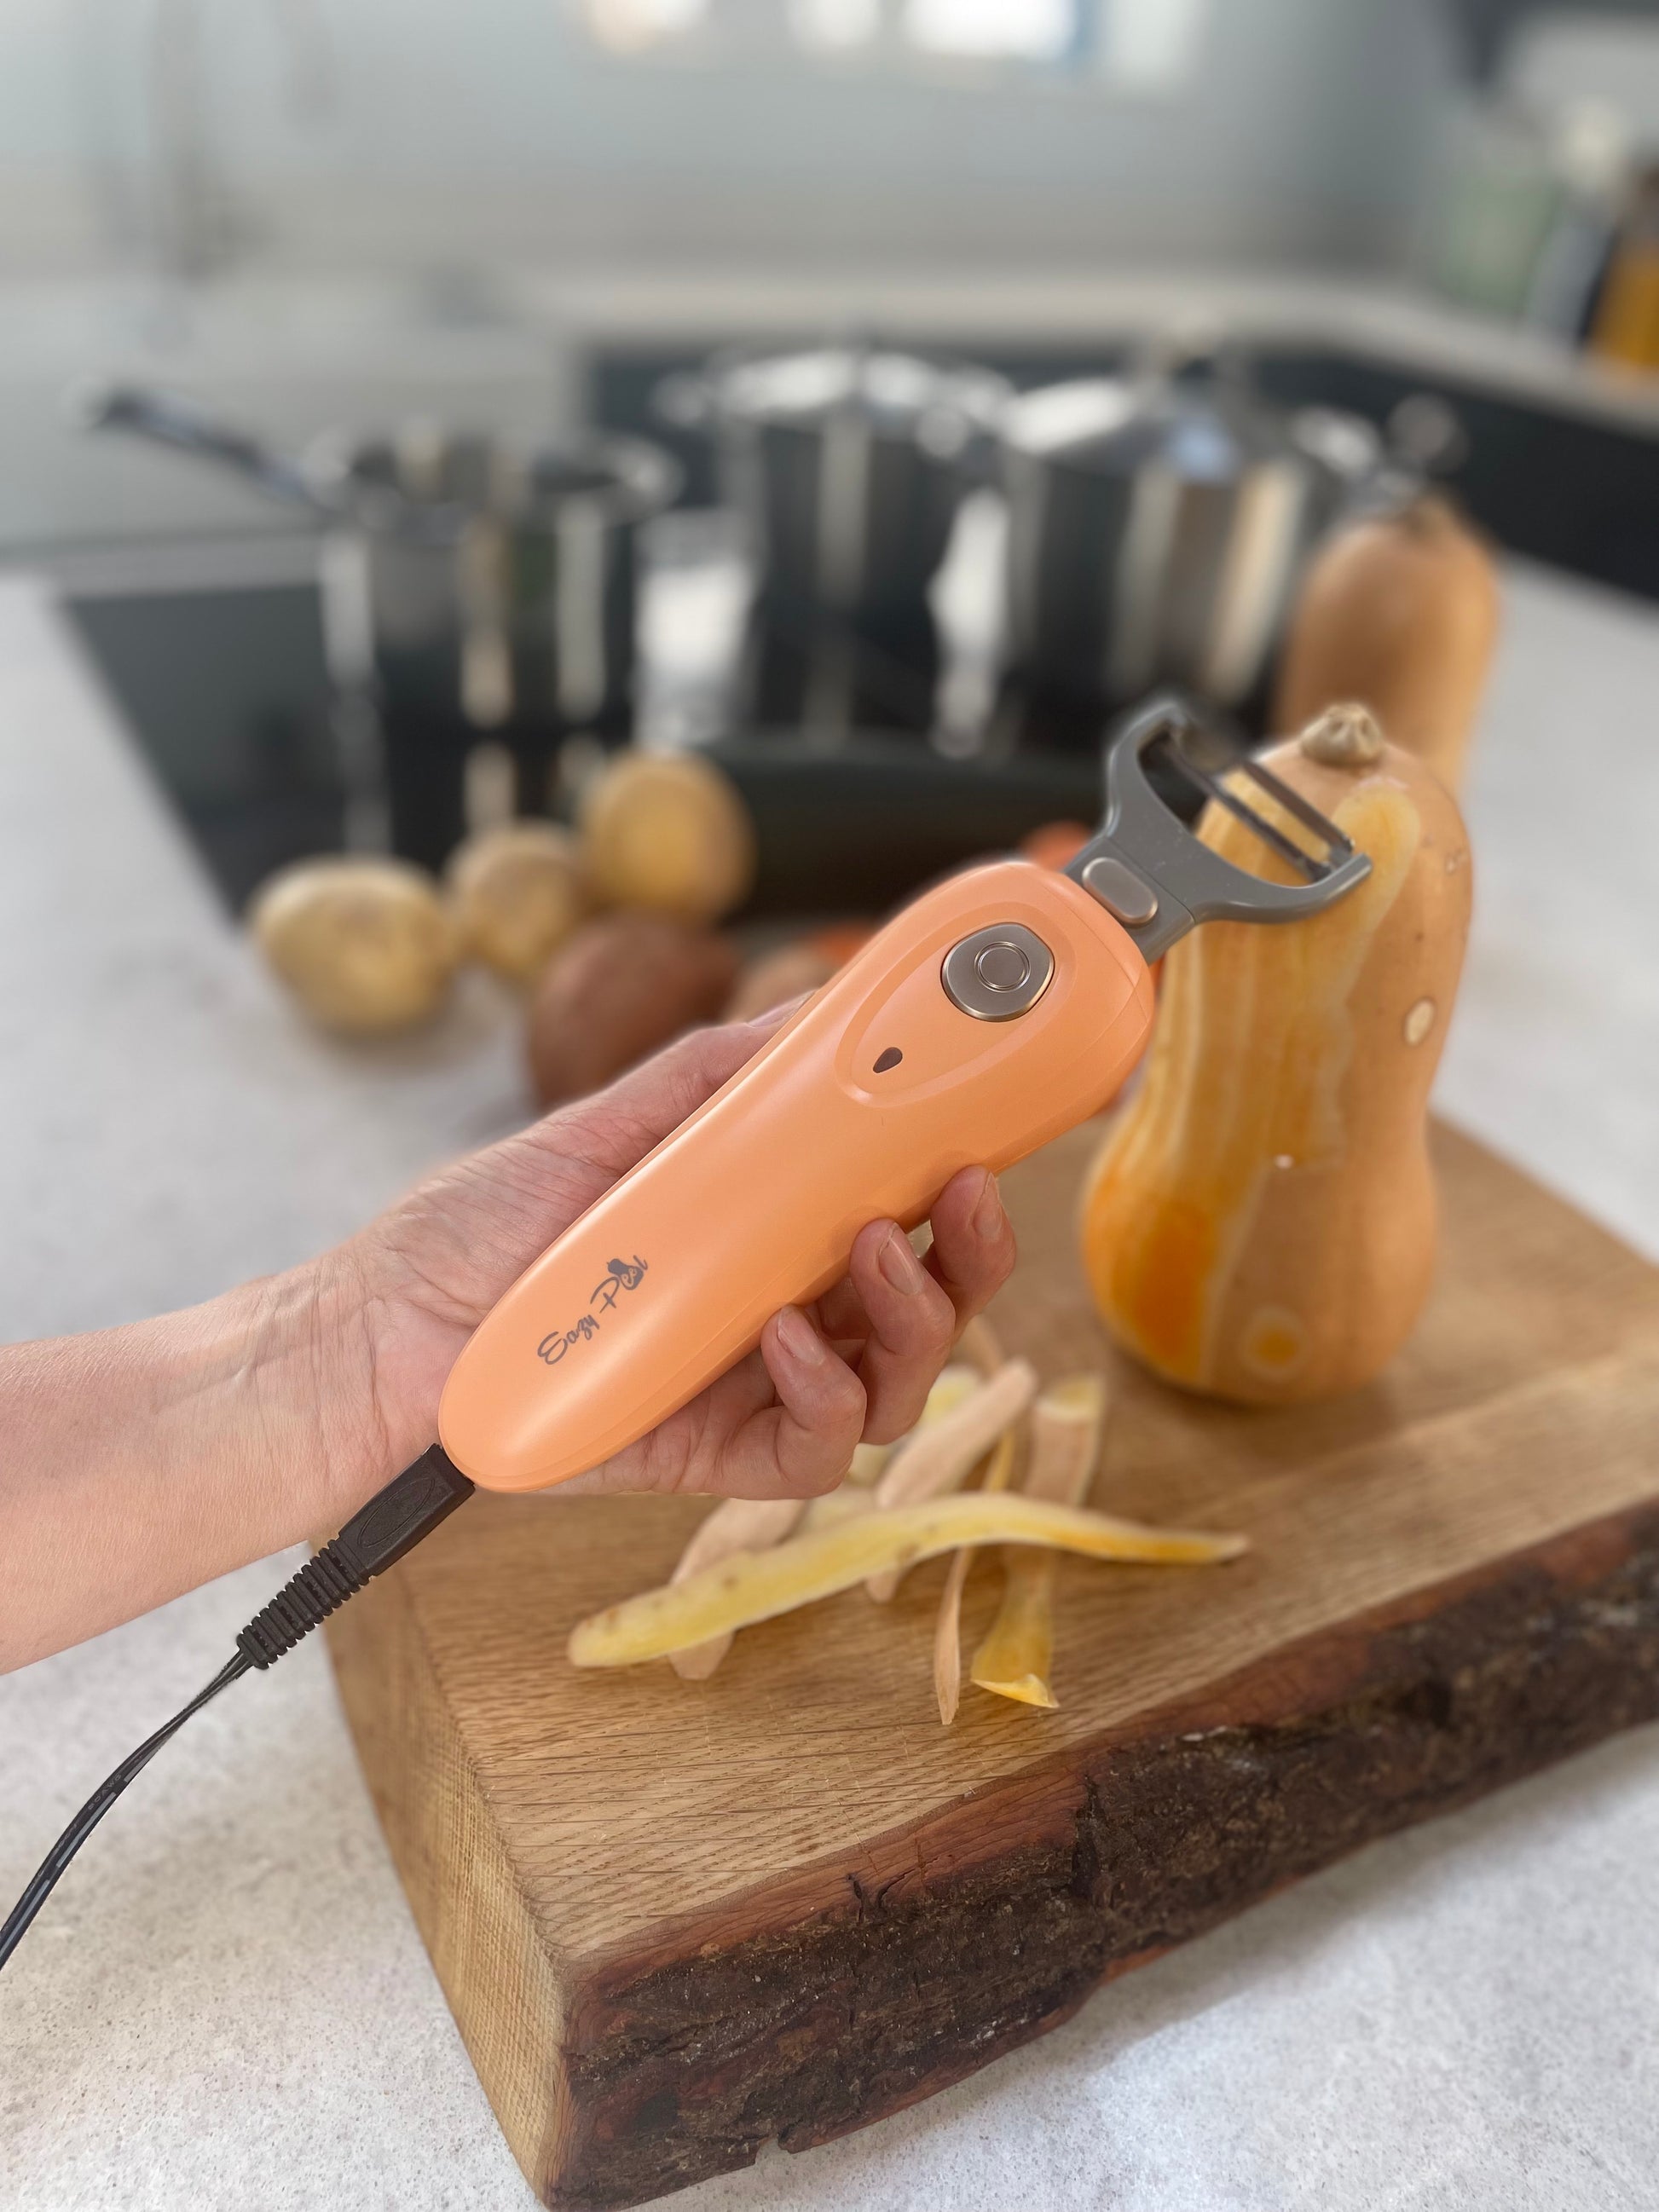 Heavy Duty Vegetable Peeler with Ultra Sharp Thick n Strong Blade for  Butternut Squash Sugar cane Asparagus,Easy to peeling hard skin of fruits  and